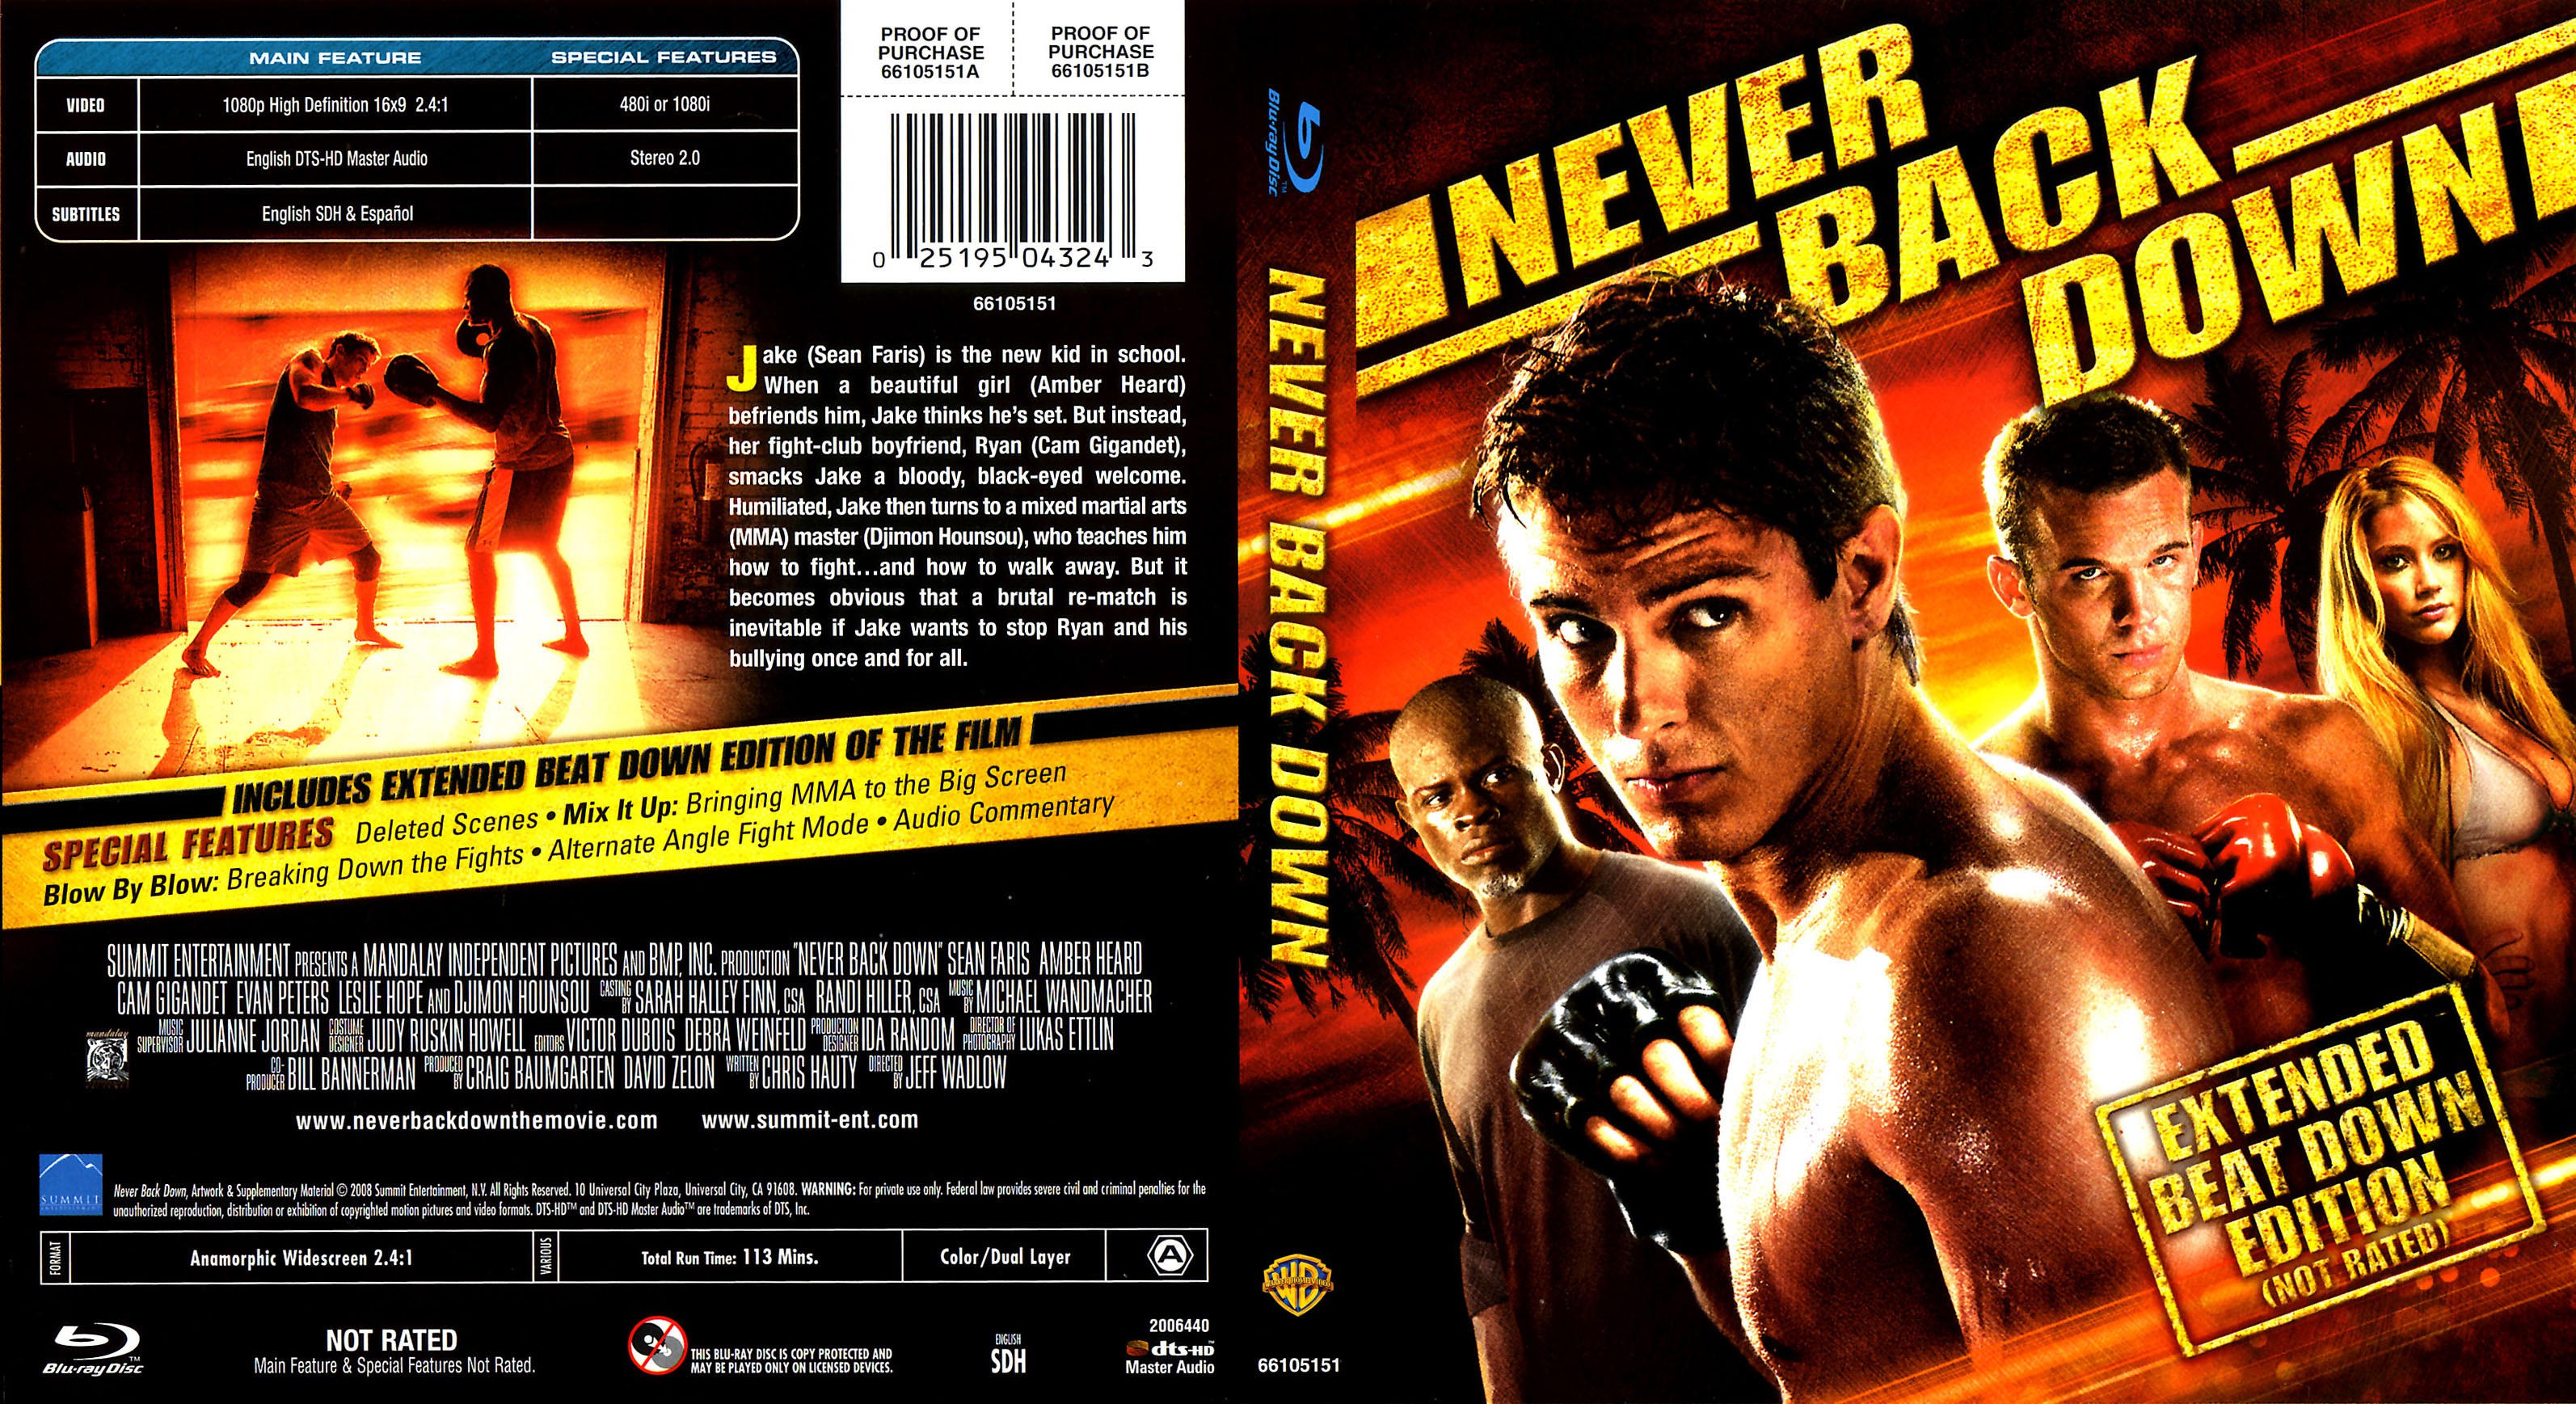 Jaquette DVD Never Back Down Zone 1 (BLU-RAY)